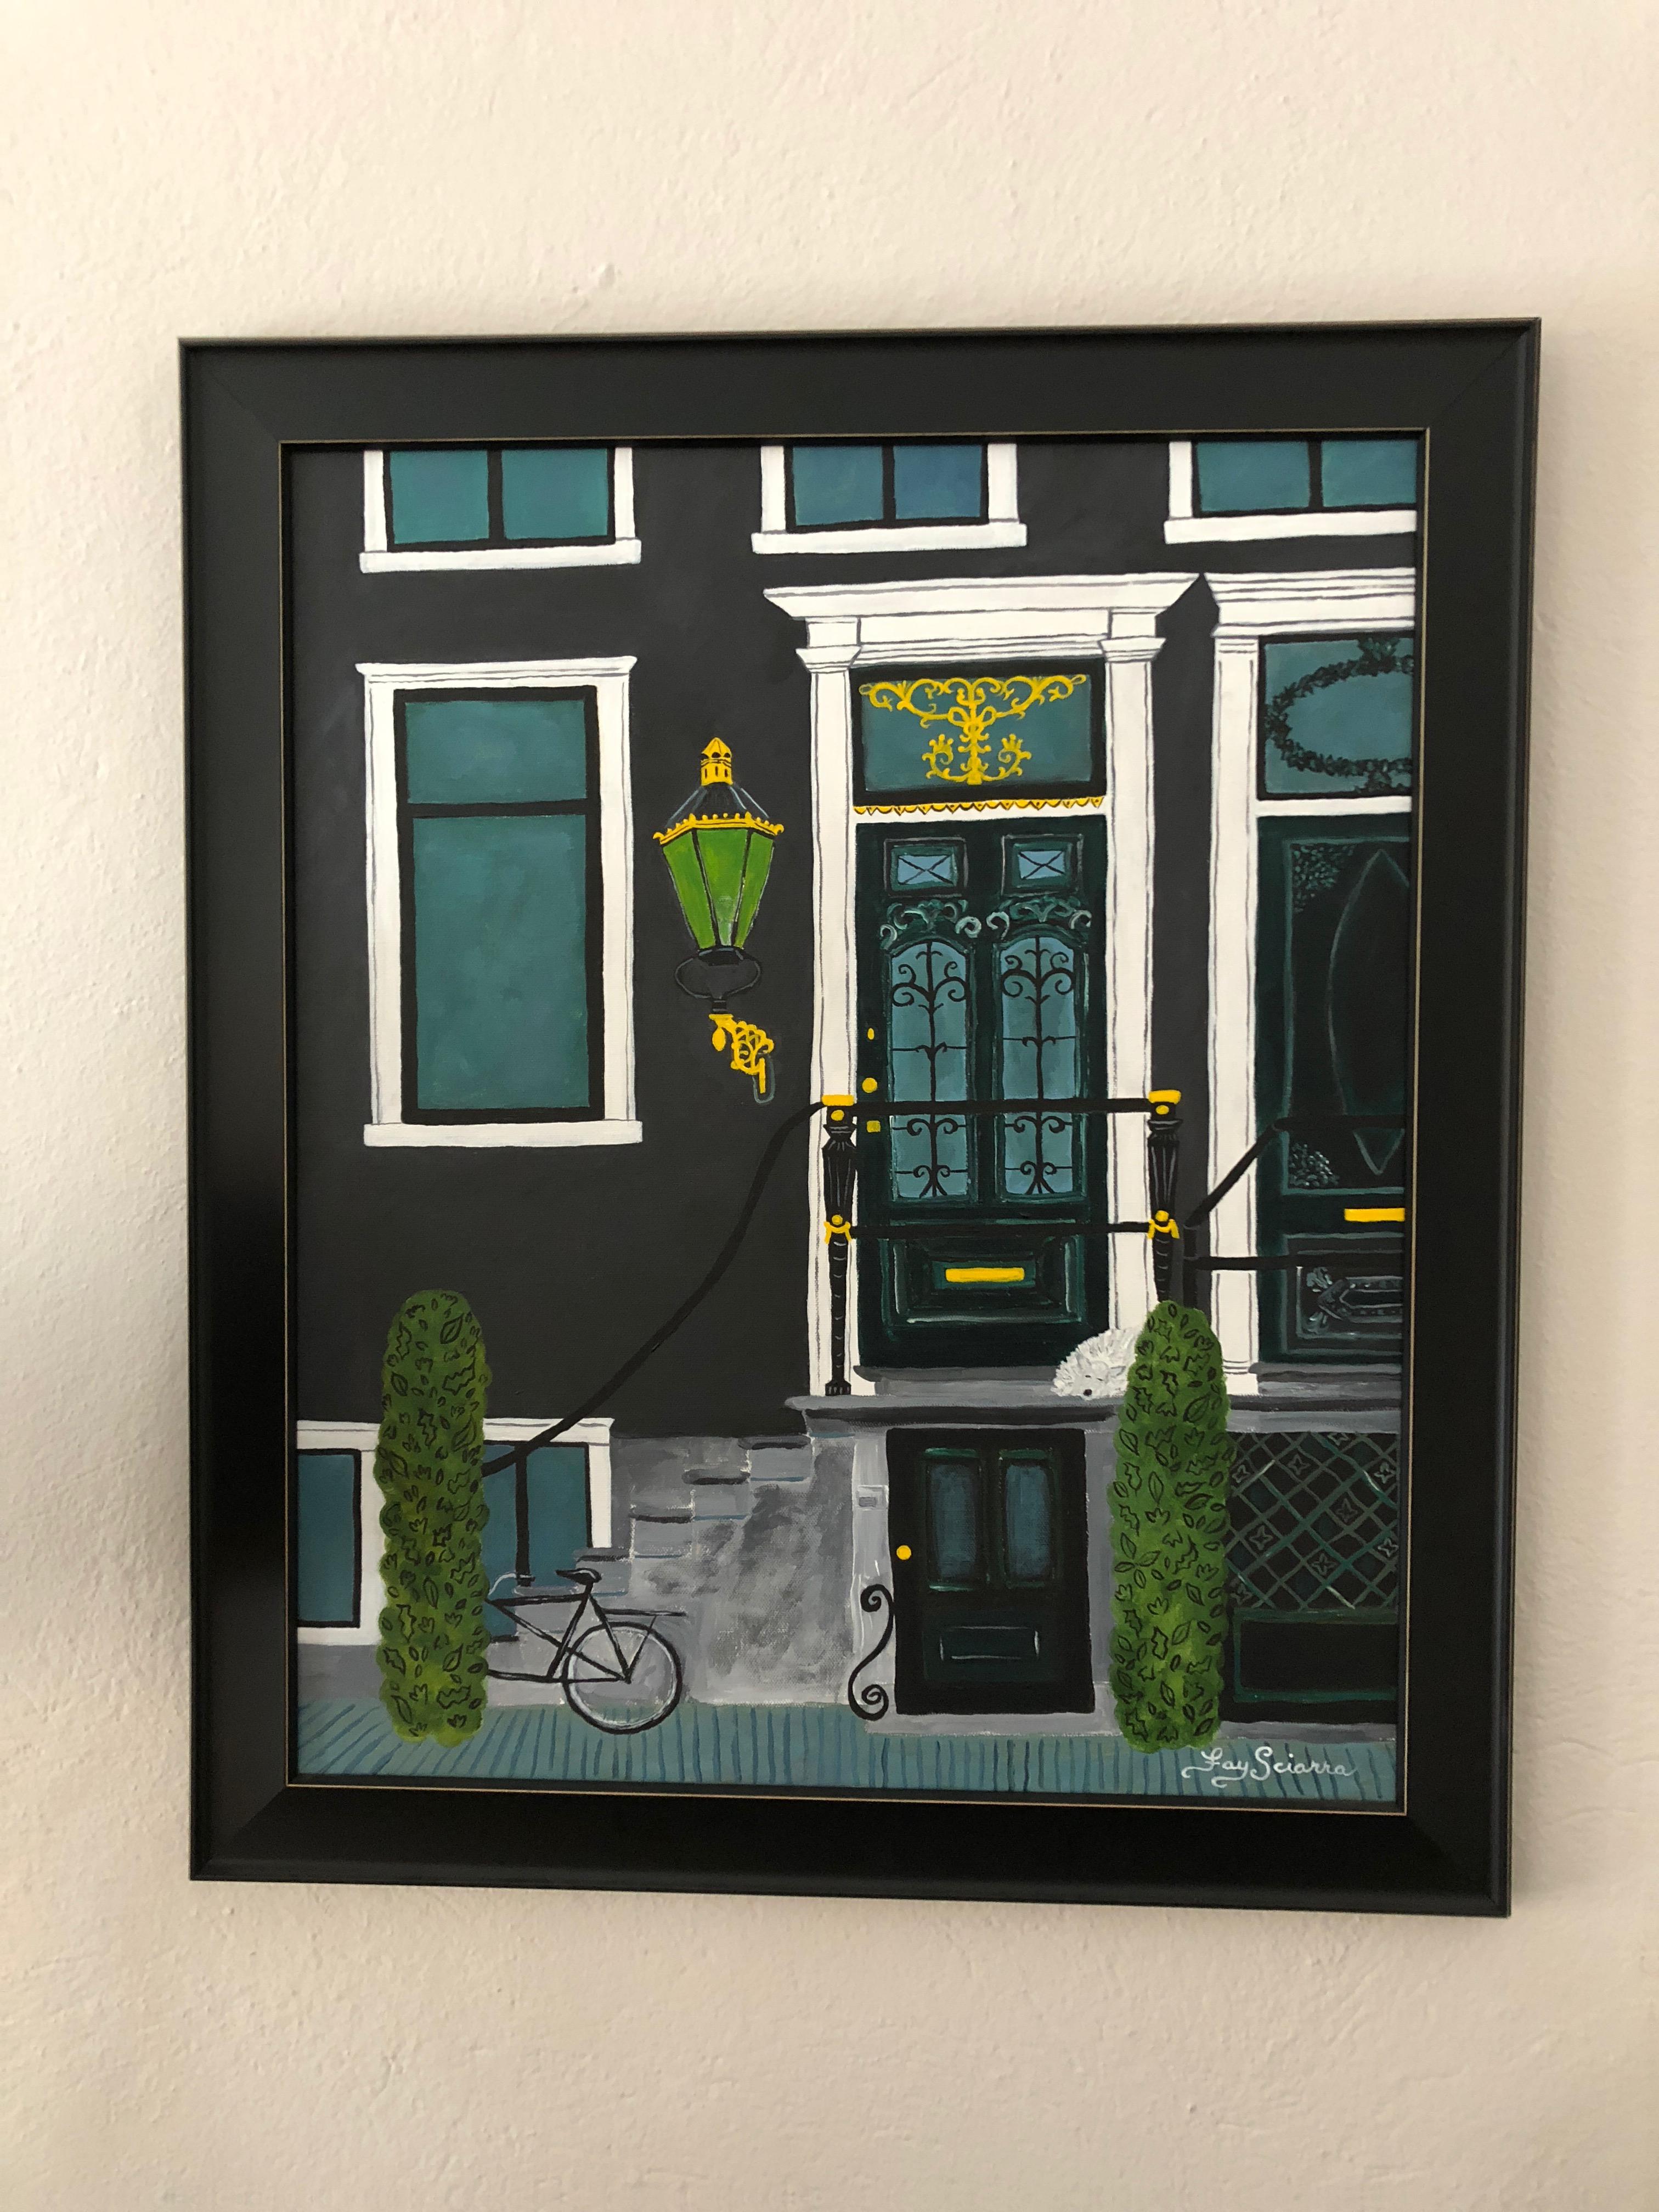 Elegant stylized giclee on canvas of an Amsterdam front door and fascade painted in a graphic sophisticated color palette of black, white, green and teal. An adorable white furry dog is resting on the landing and a typical bicycle is parked out